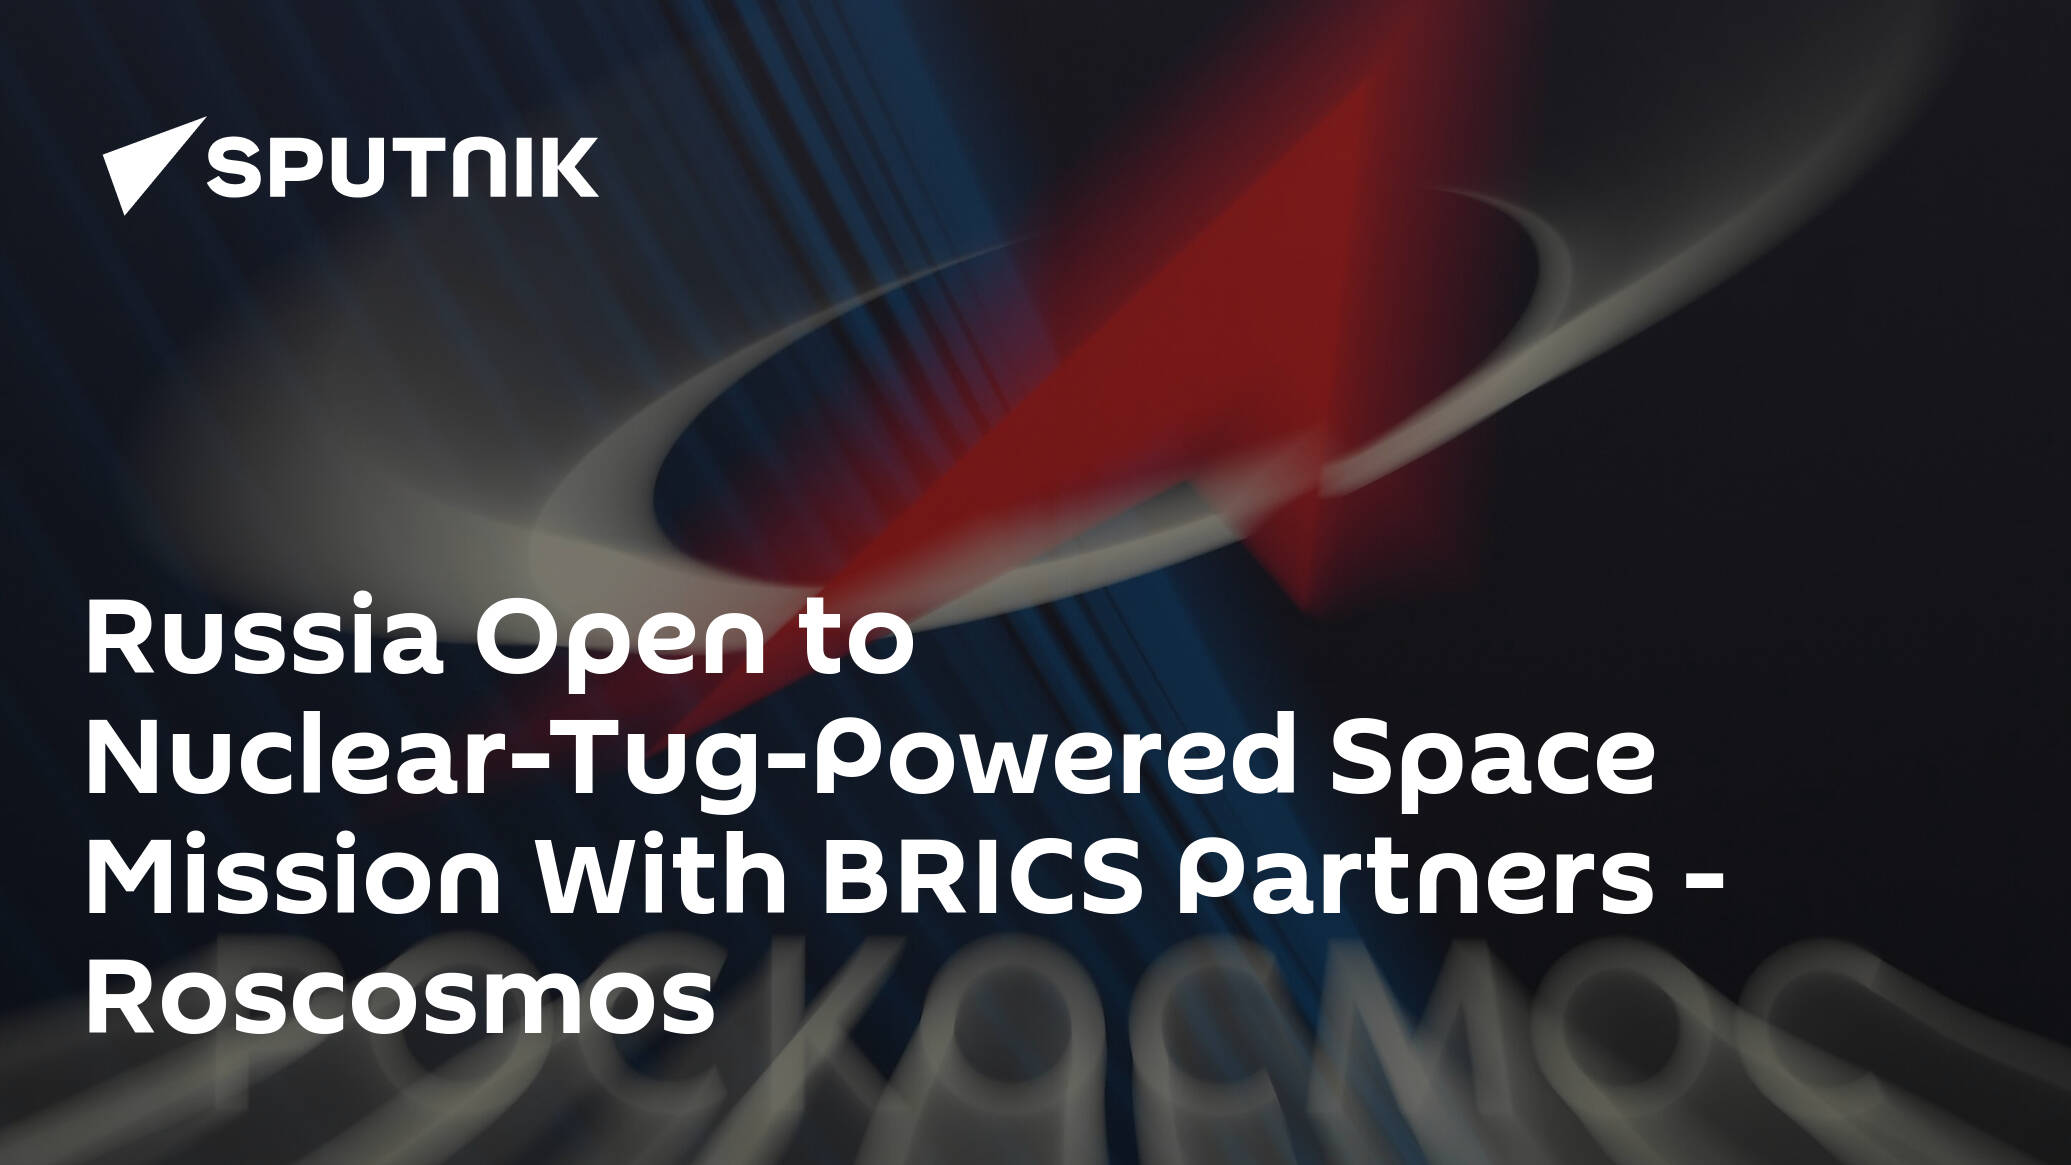 Russia Open to Nuclear-Tug-Powered Space Mission With BRICS Partners – Roscosmos